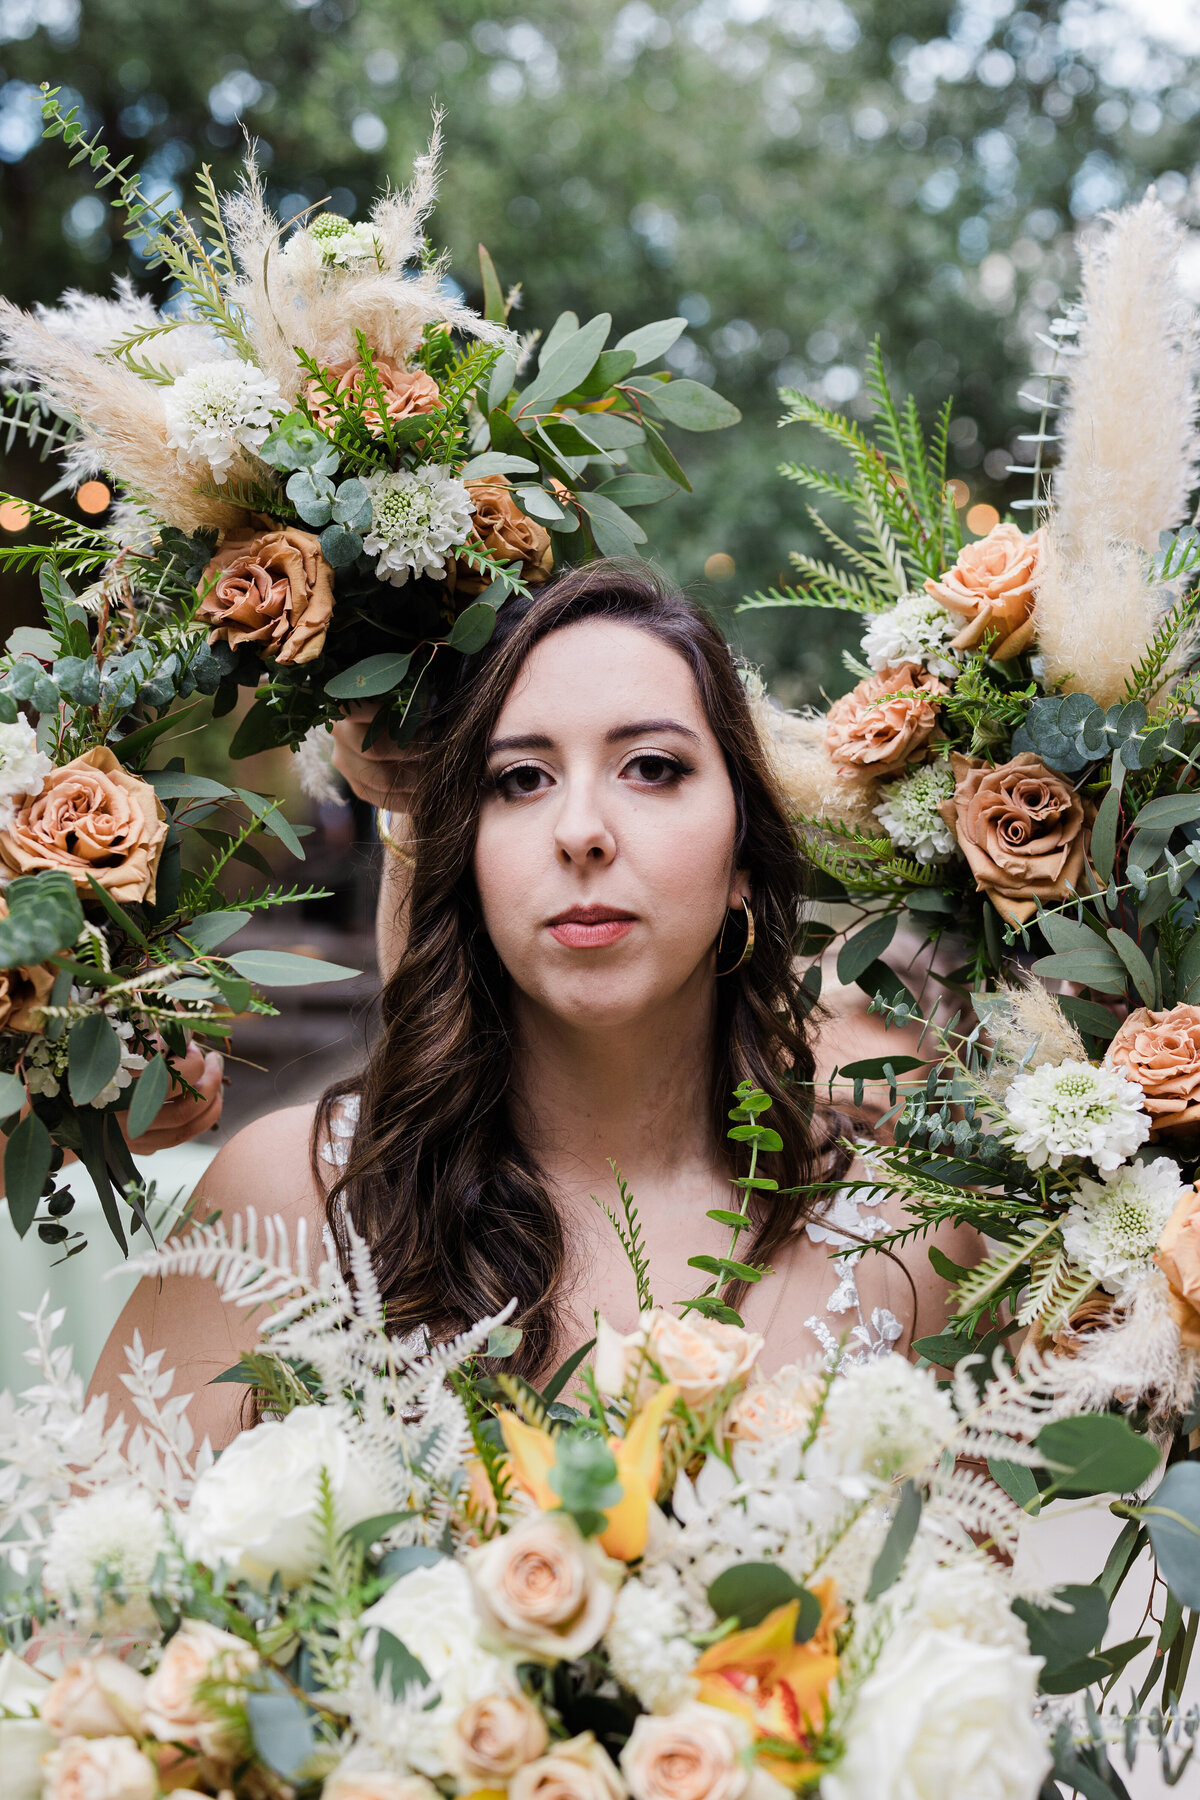 Portrait of a bride surrounded by a ring of bouquets after her wedding ceremony at The 4 Eleven in Fort Worth, Texas. The bride is wearing a sleeveless, white dress and all the bouquets are being held up by her wedding party out of frame.